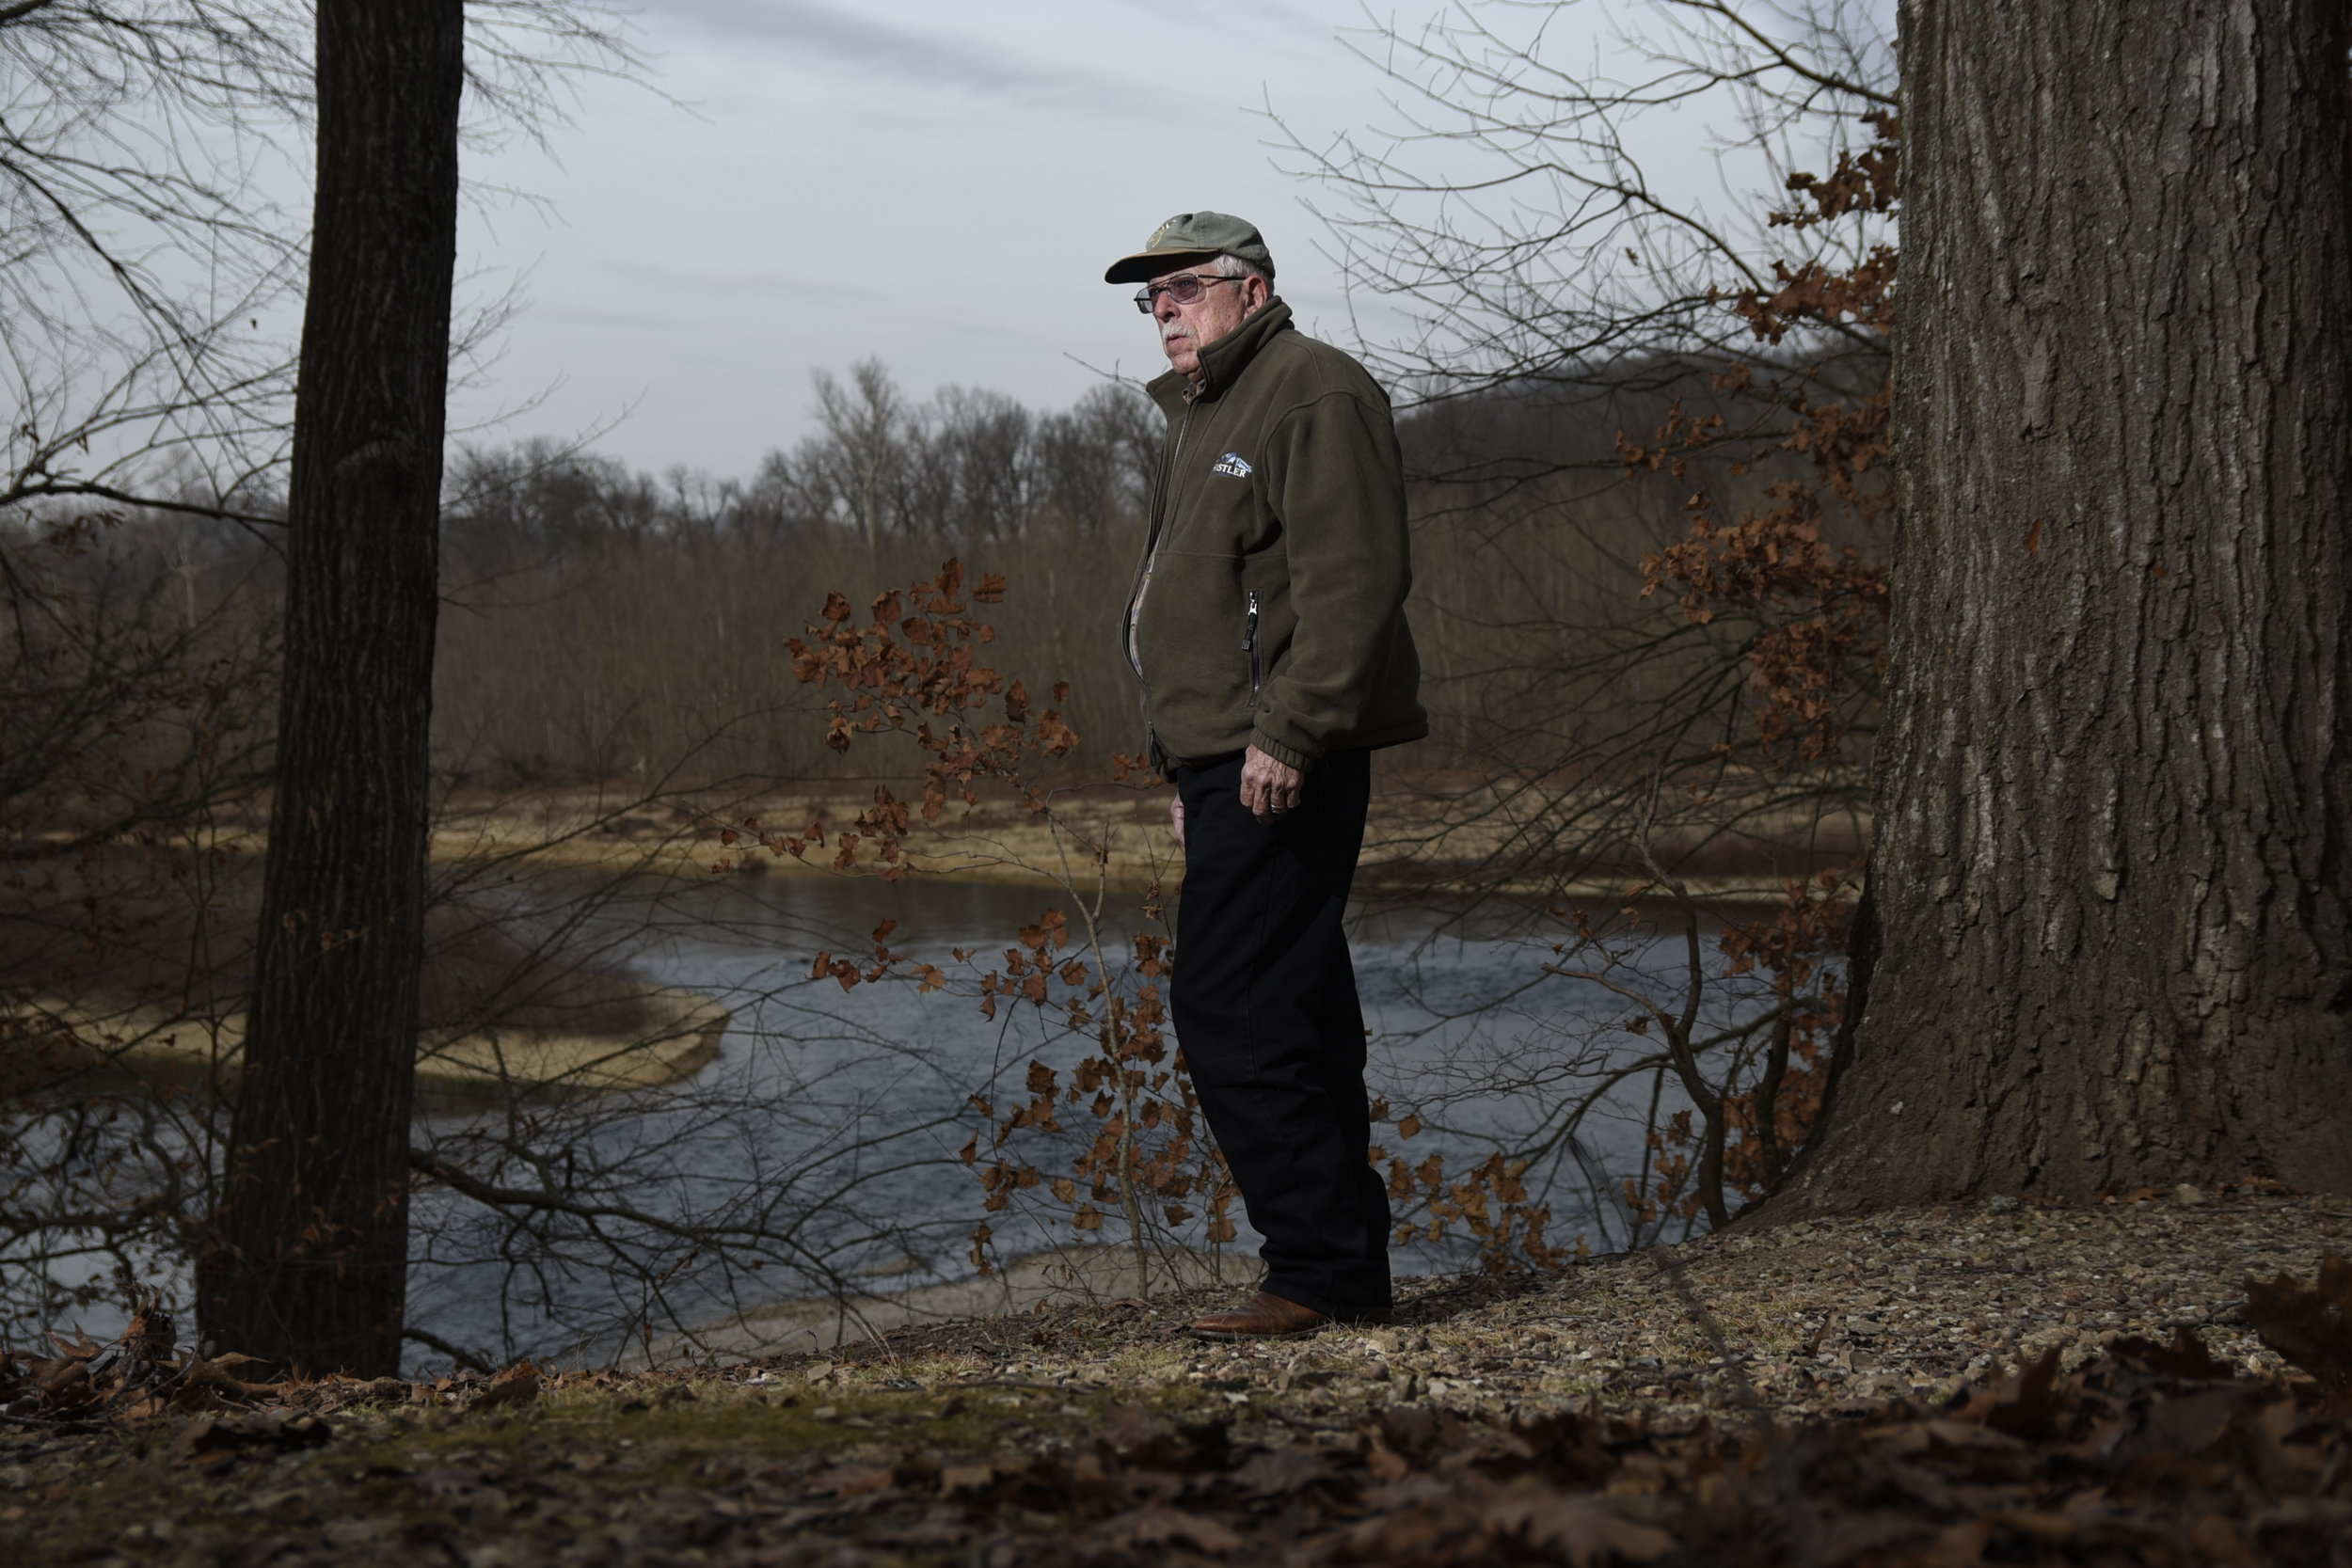  Ed Brocksmith poses along the Illinois River. He is a co-founder of the non-profit organization Save The Illinois River. CREDIT: Nick Oxford for The New York Times 